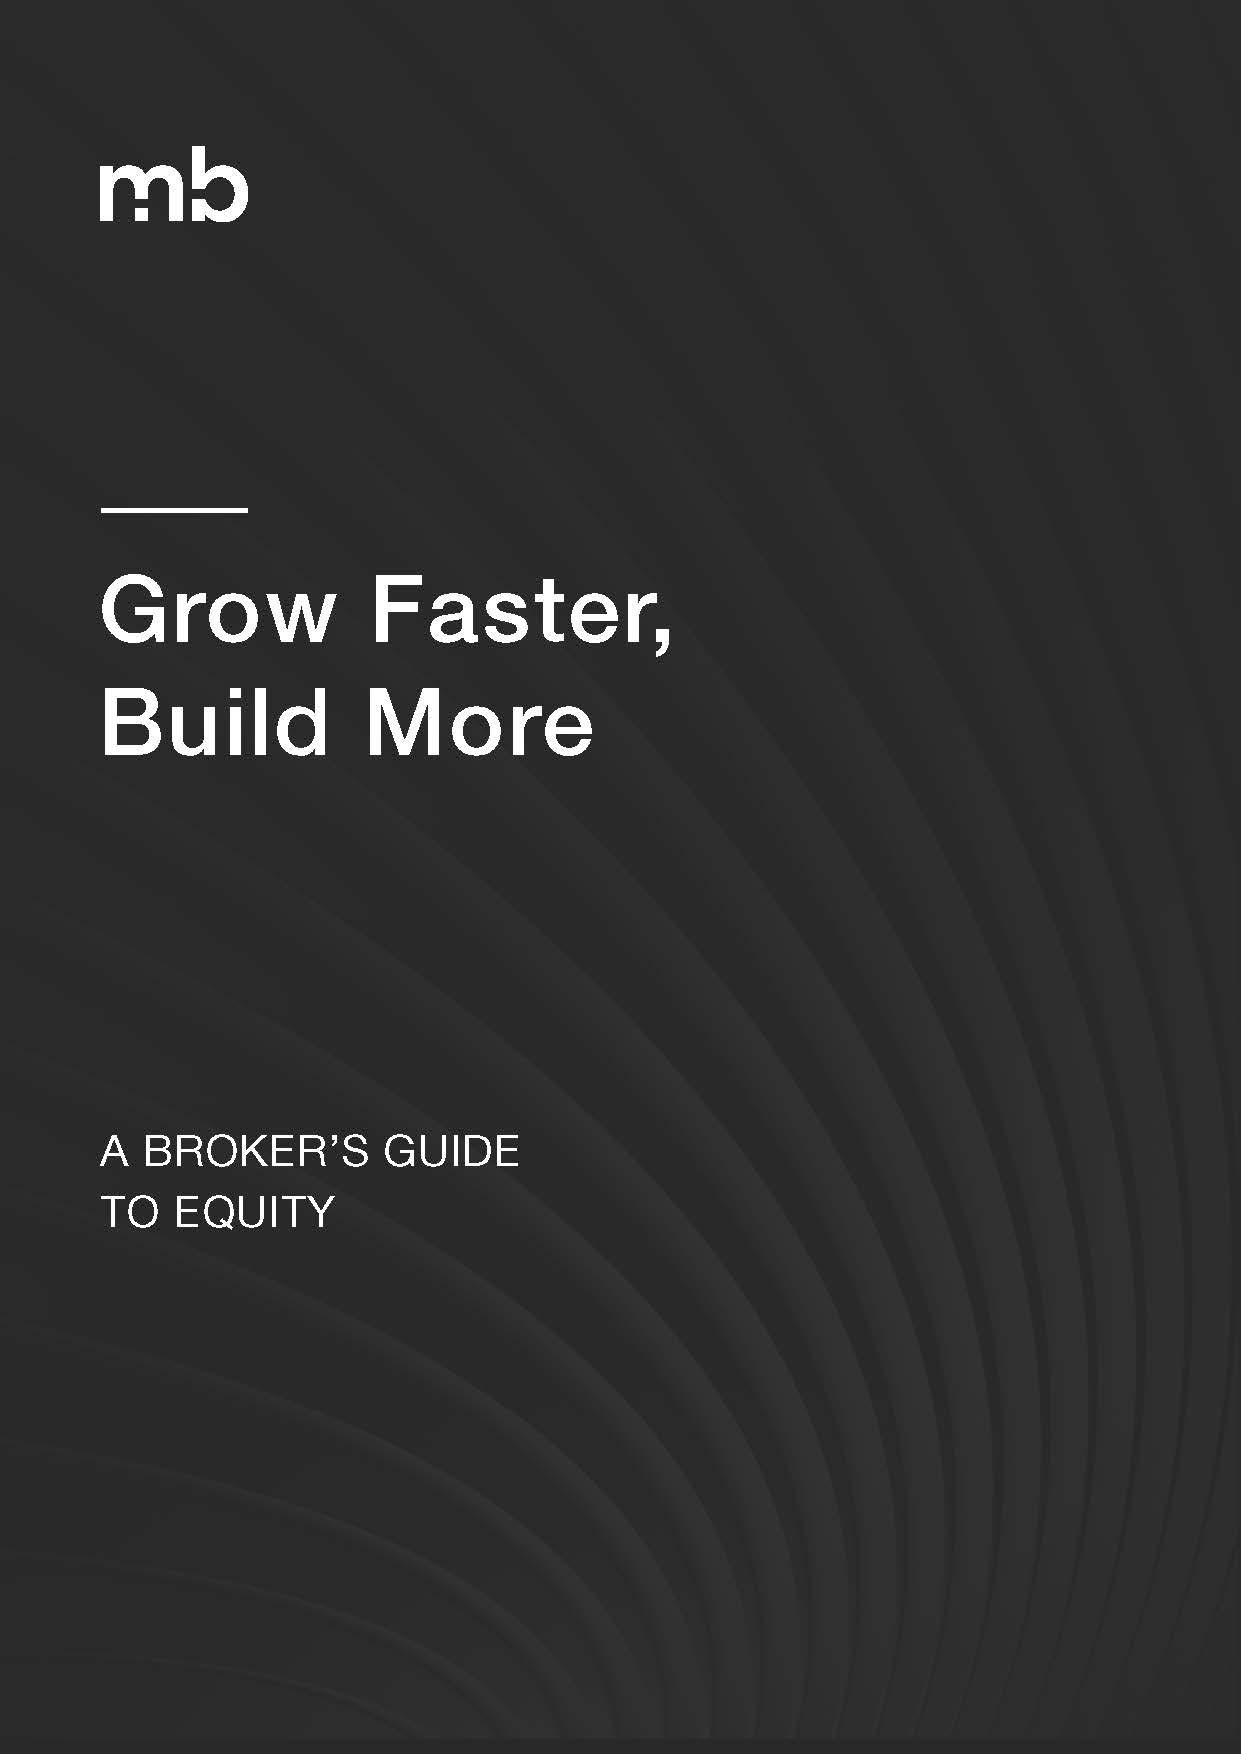 Read our Equity Guide